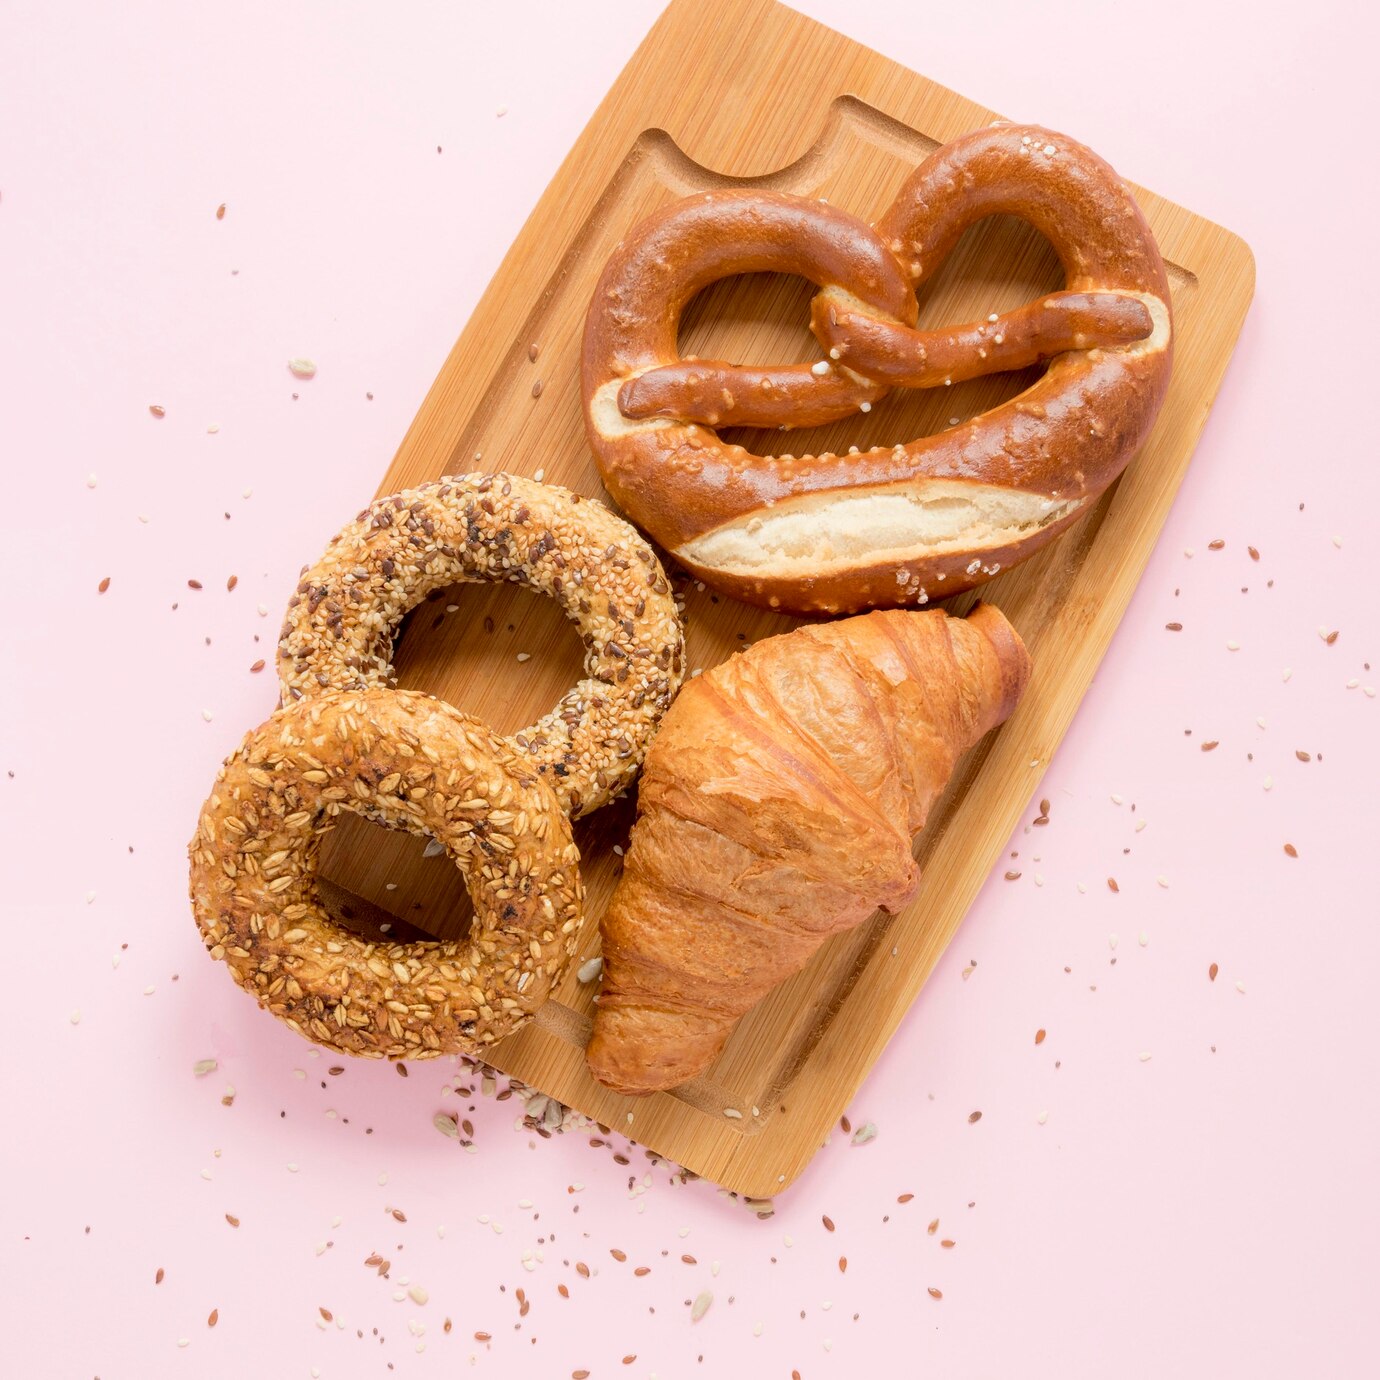 wooden board with baked snacks of donut, pretzel, croissant in a cafe with healthy snacks